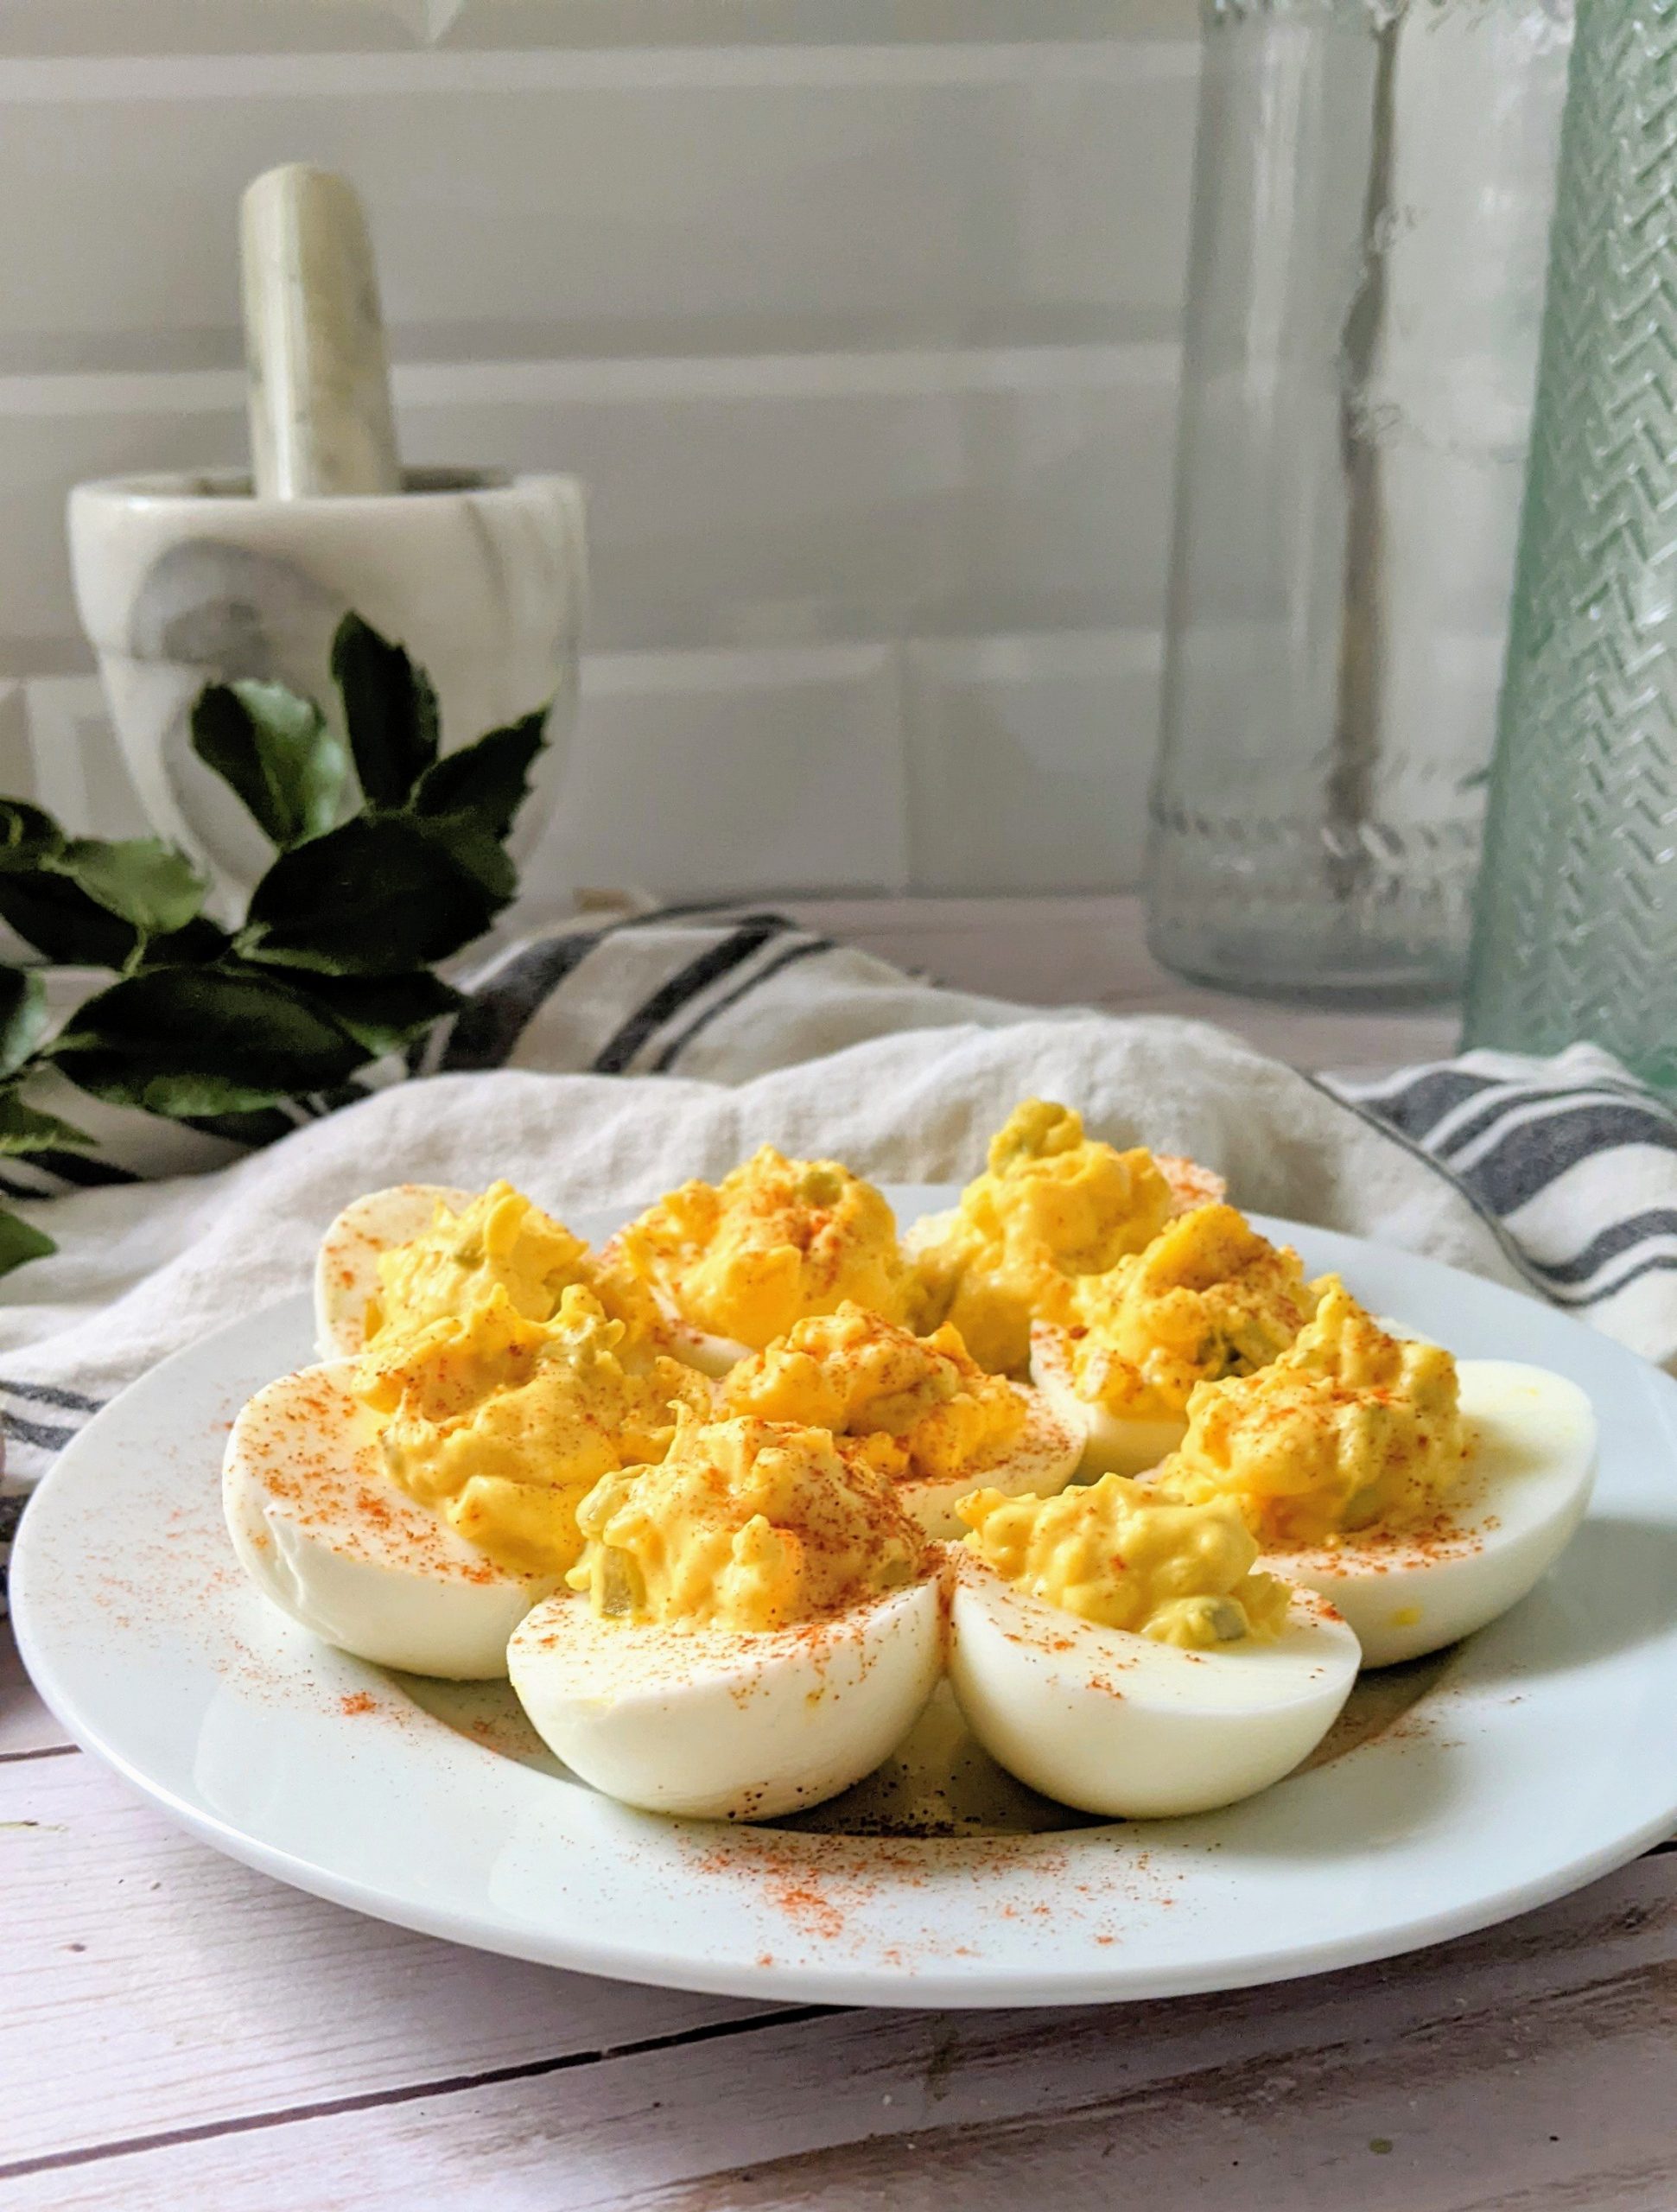 deviled eggs without mayonnaise healthy egg recipes with nonfat greek yogurt sweet relish mustard dijon or whole grain mustard and paprika